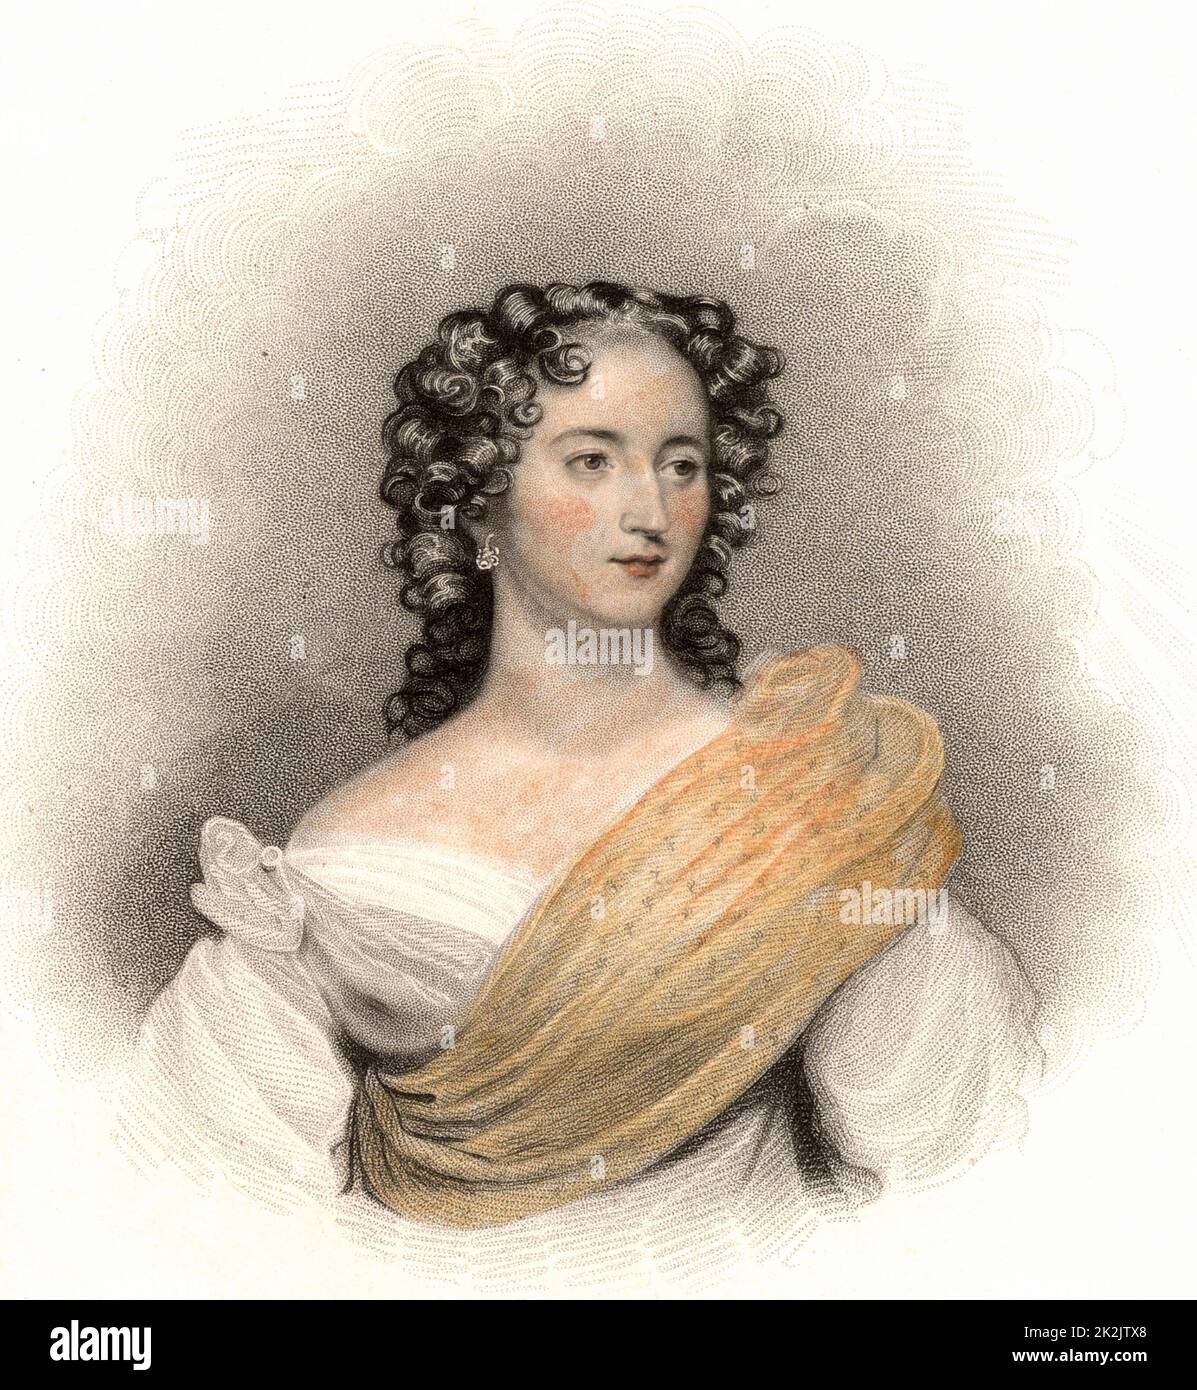 Harriet Constance Smithson (1800-1854) Irish actress. In 1827 she appeared in Paris as Ophelia 'Hamlet' and Juliet in 'Romeo and Juliet' when the French composer Hector Berlioz became enamoured of her. They married in 1833 and separated in 1841. Engraving published 1819. Stock Photo